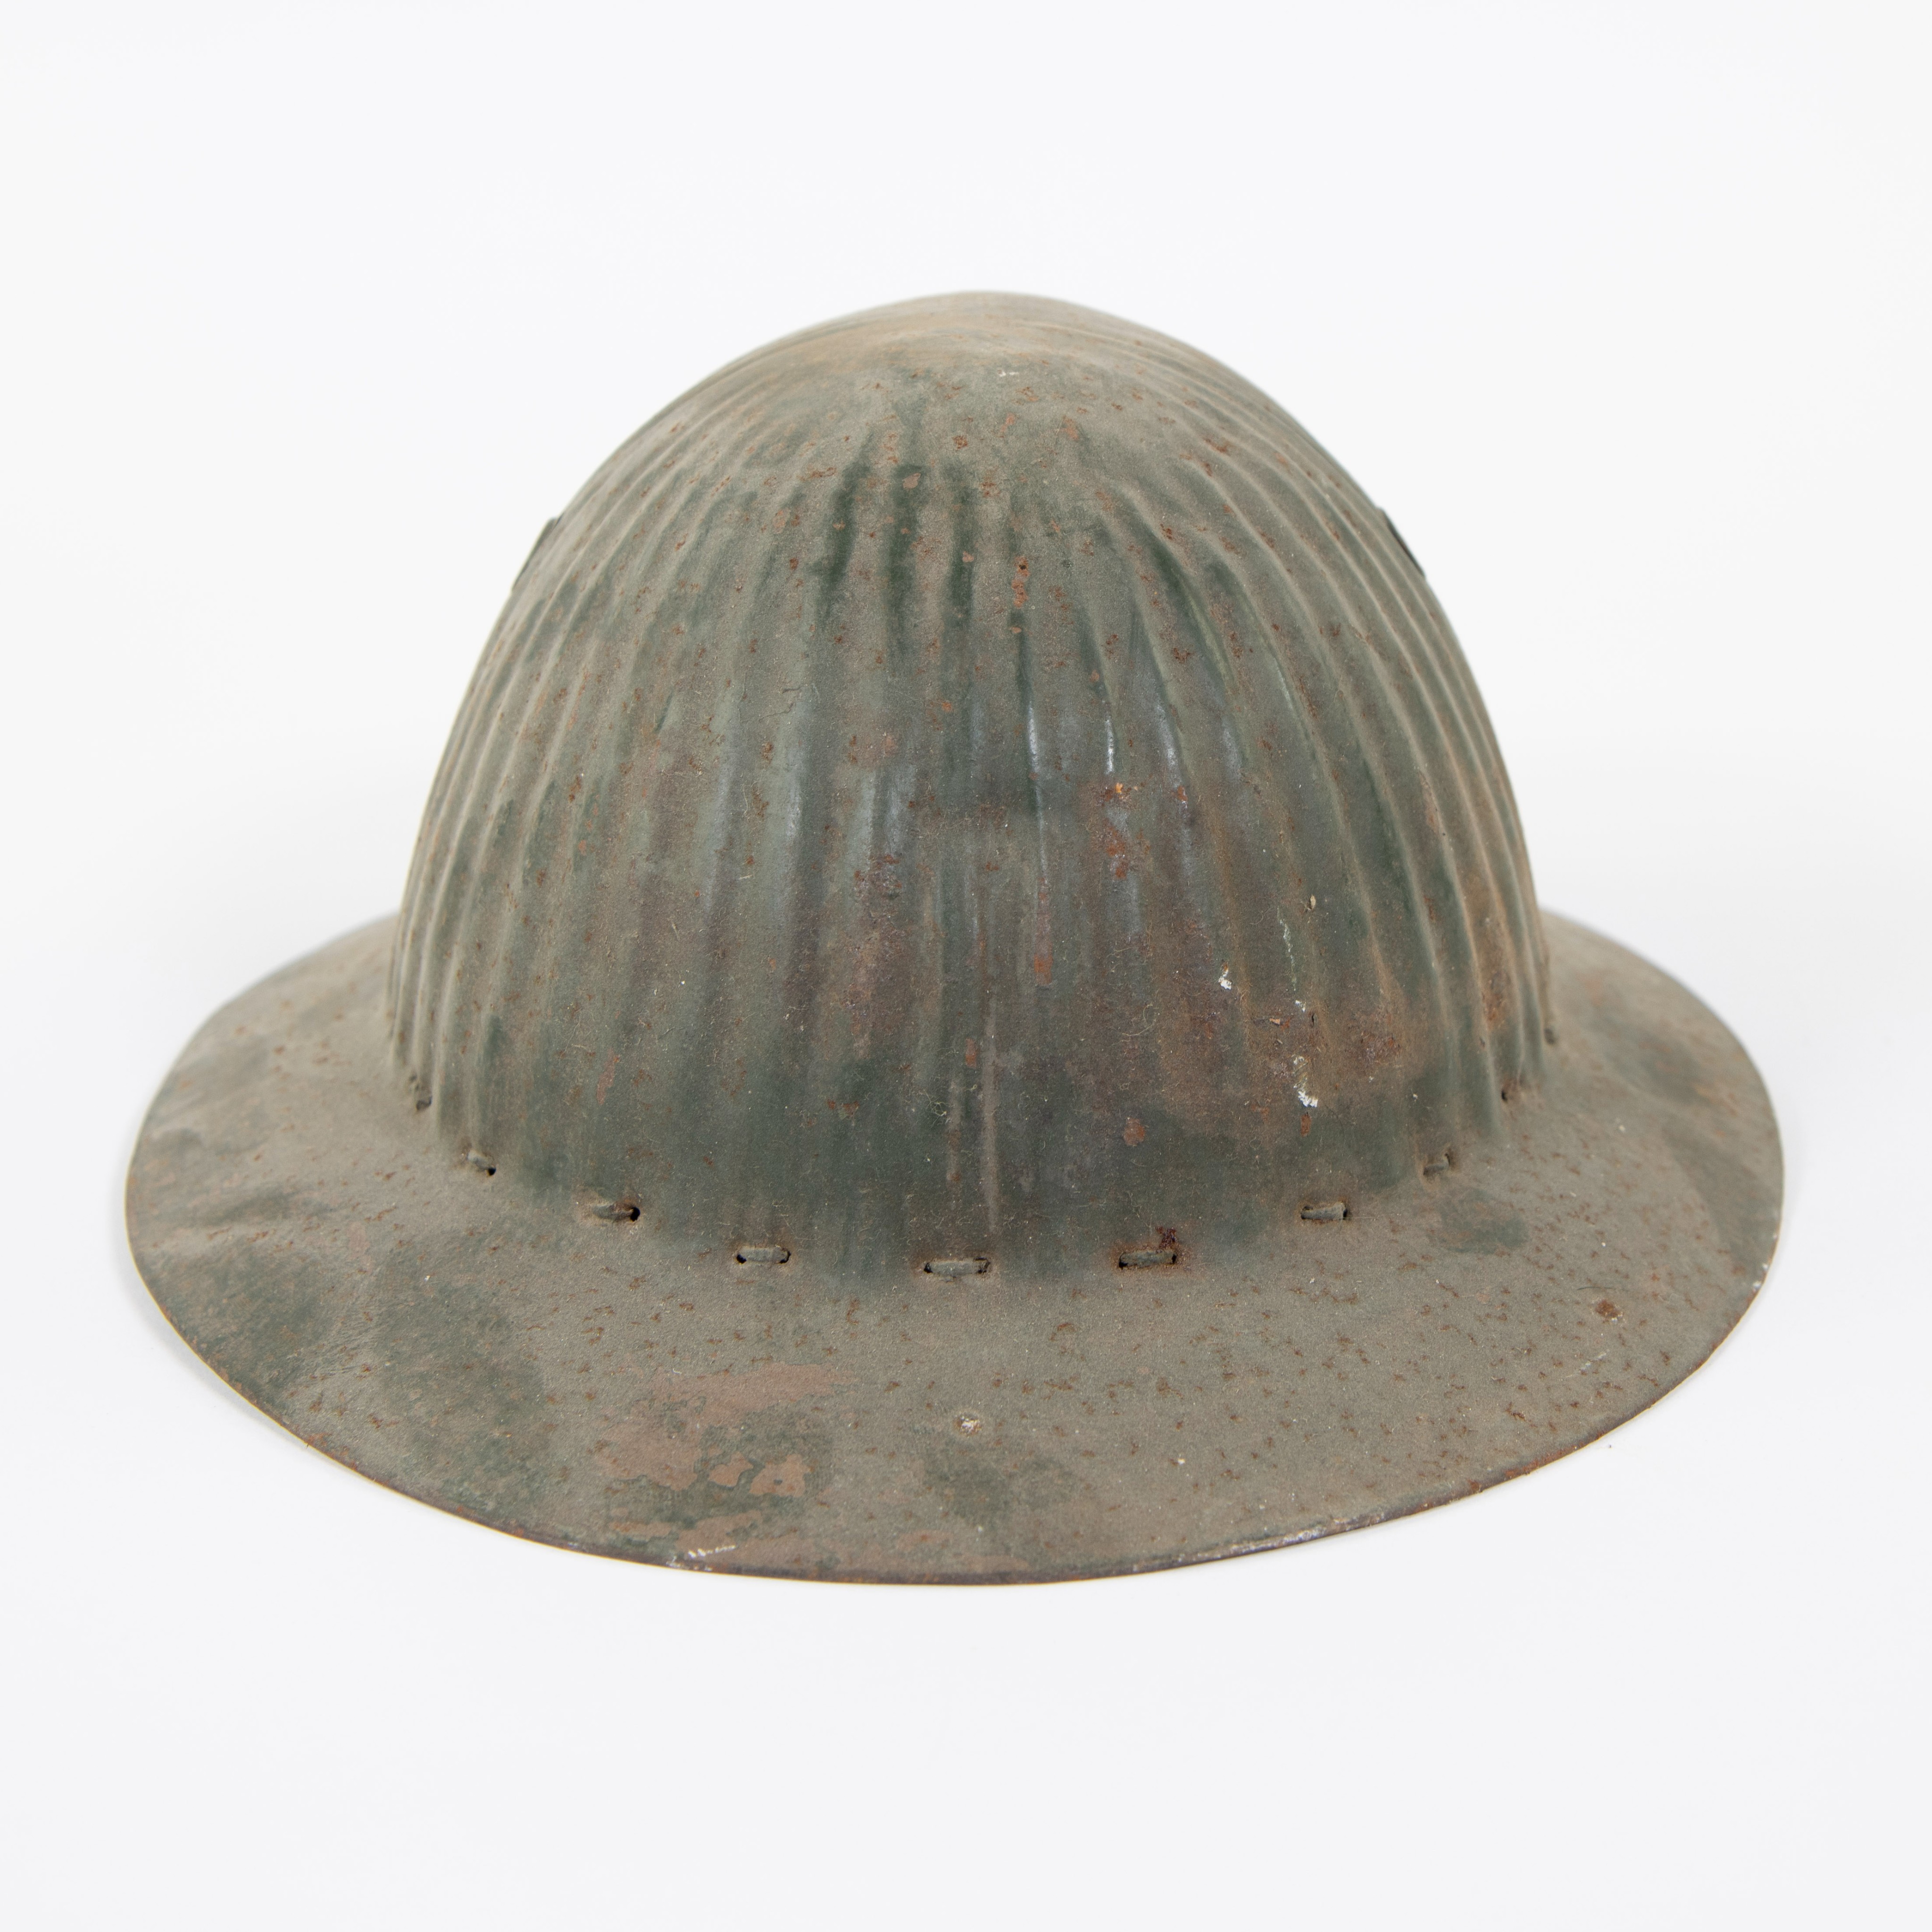 First English WW I helmet, sold to Portugal and used in the Civil War. - Image 3 of 4